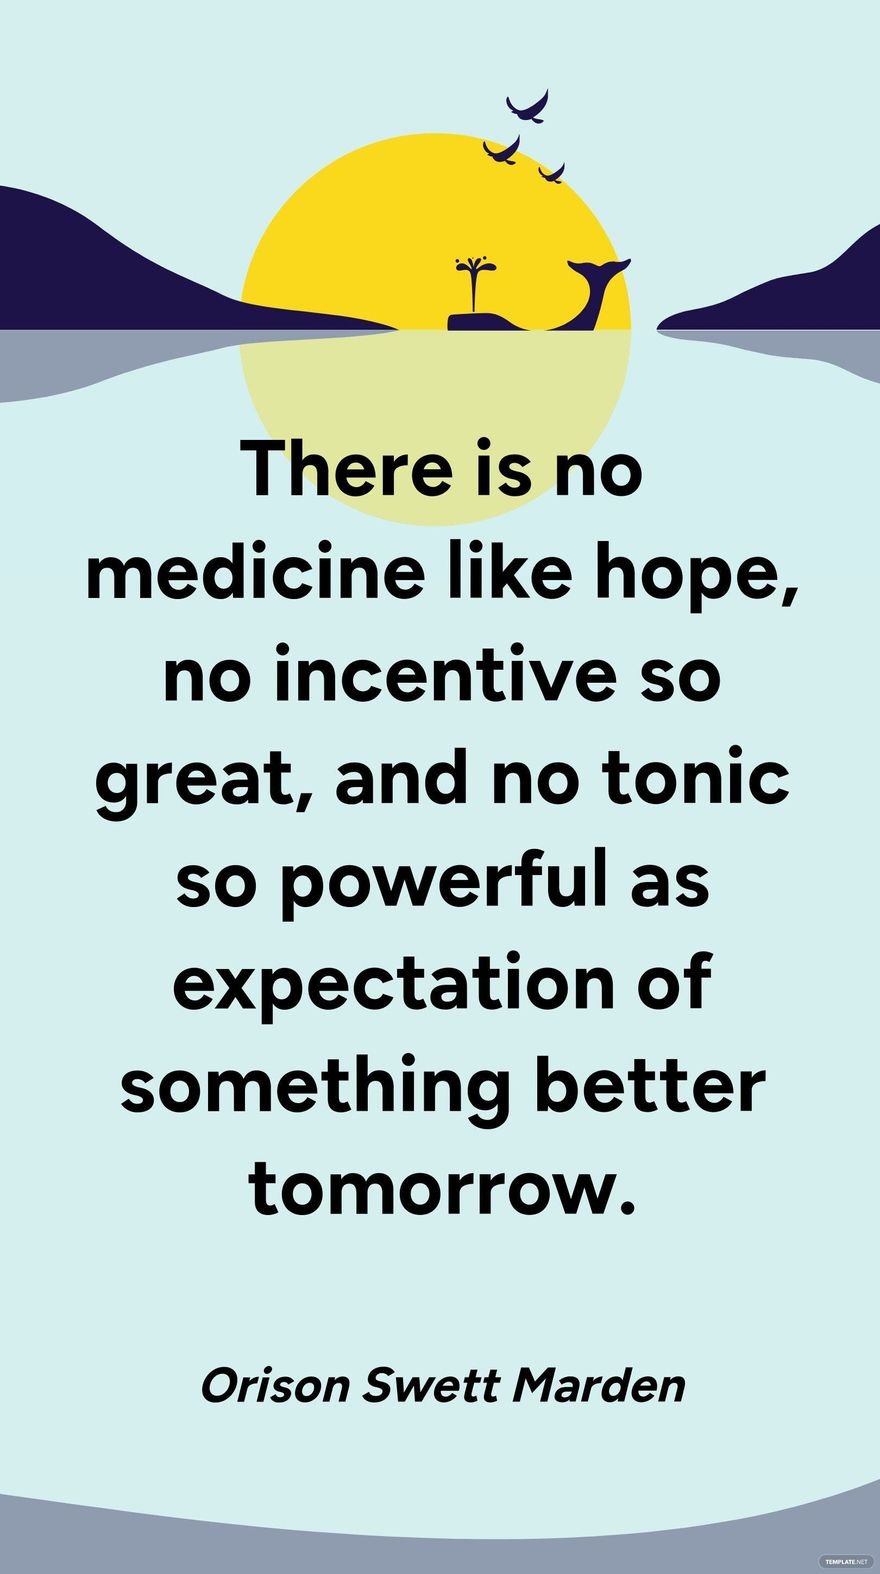 Free Orison Swett Marden - There is no medicine like hope, no incentive so great, and no tonic so powerful as expectation of something better tomorrow.